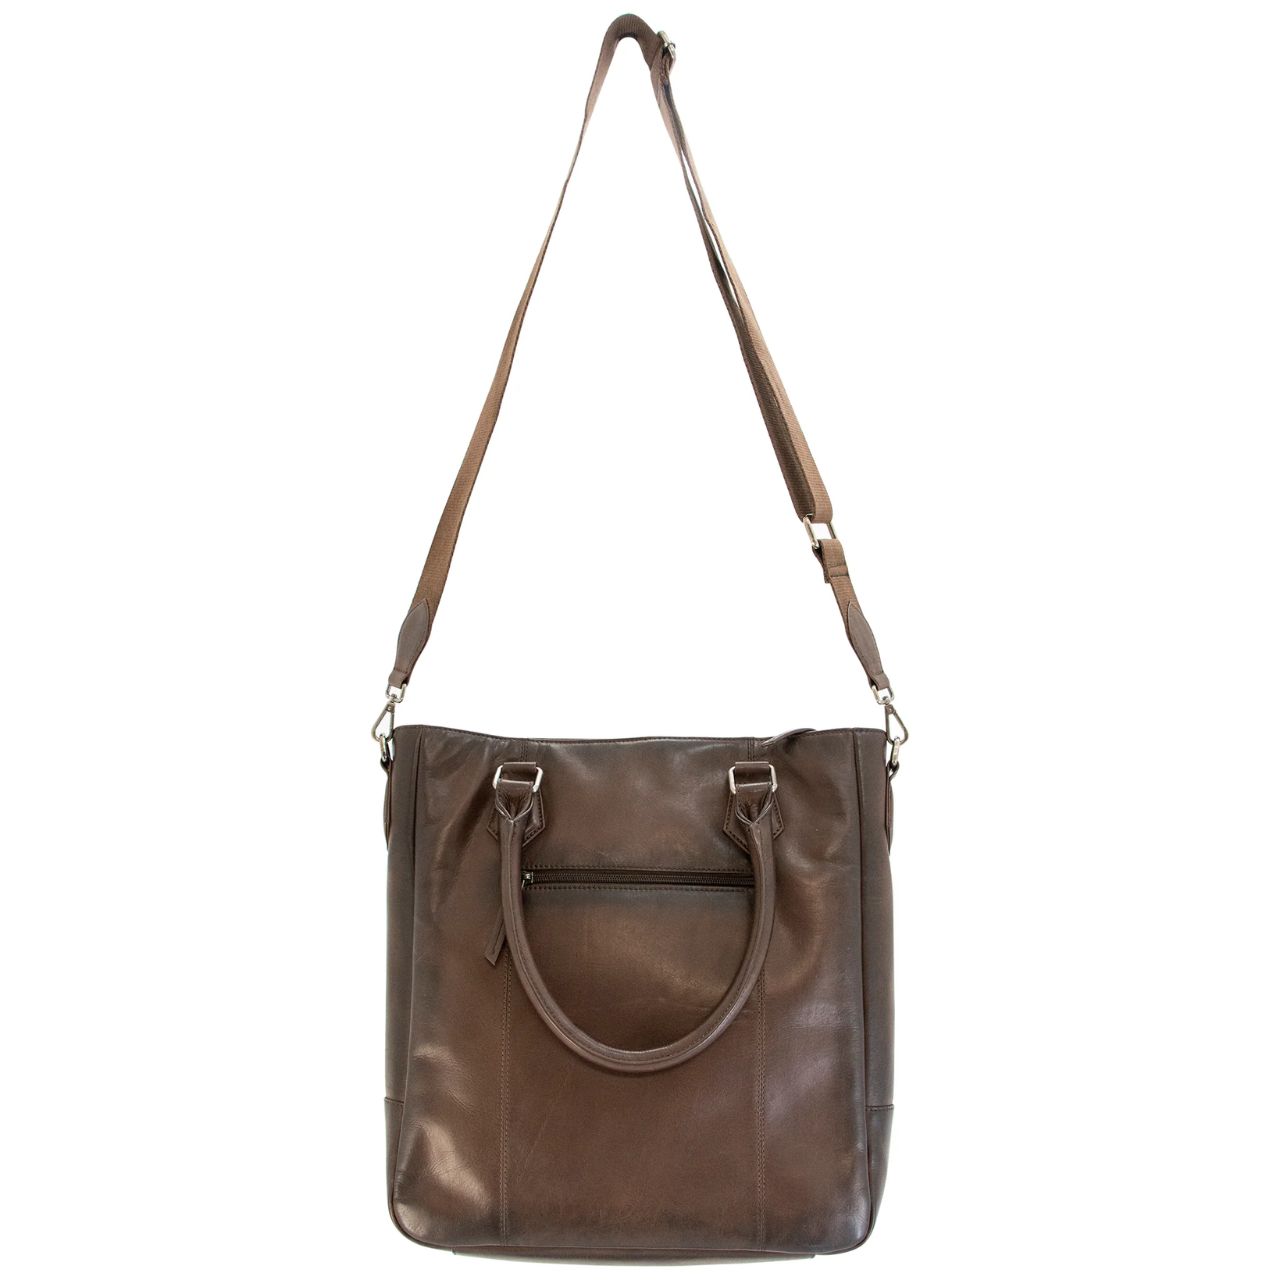 Brown Flat Tote concealed carry purse with adjustable crossbody strap